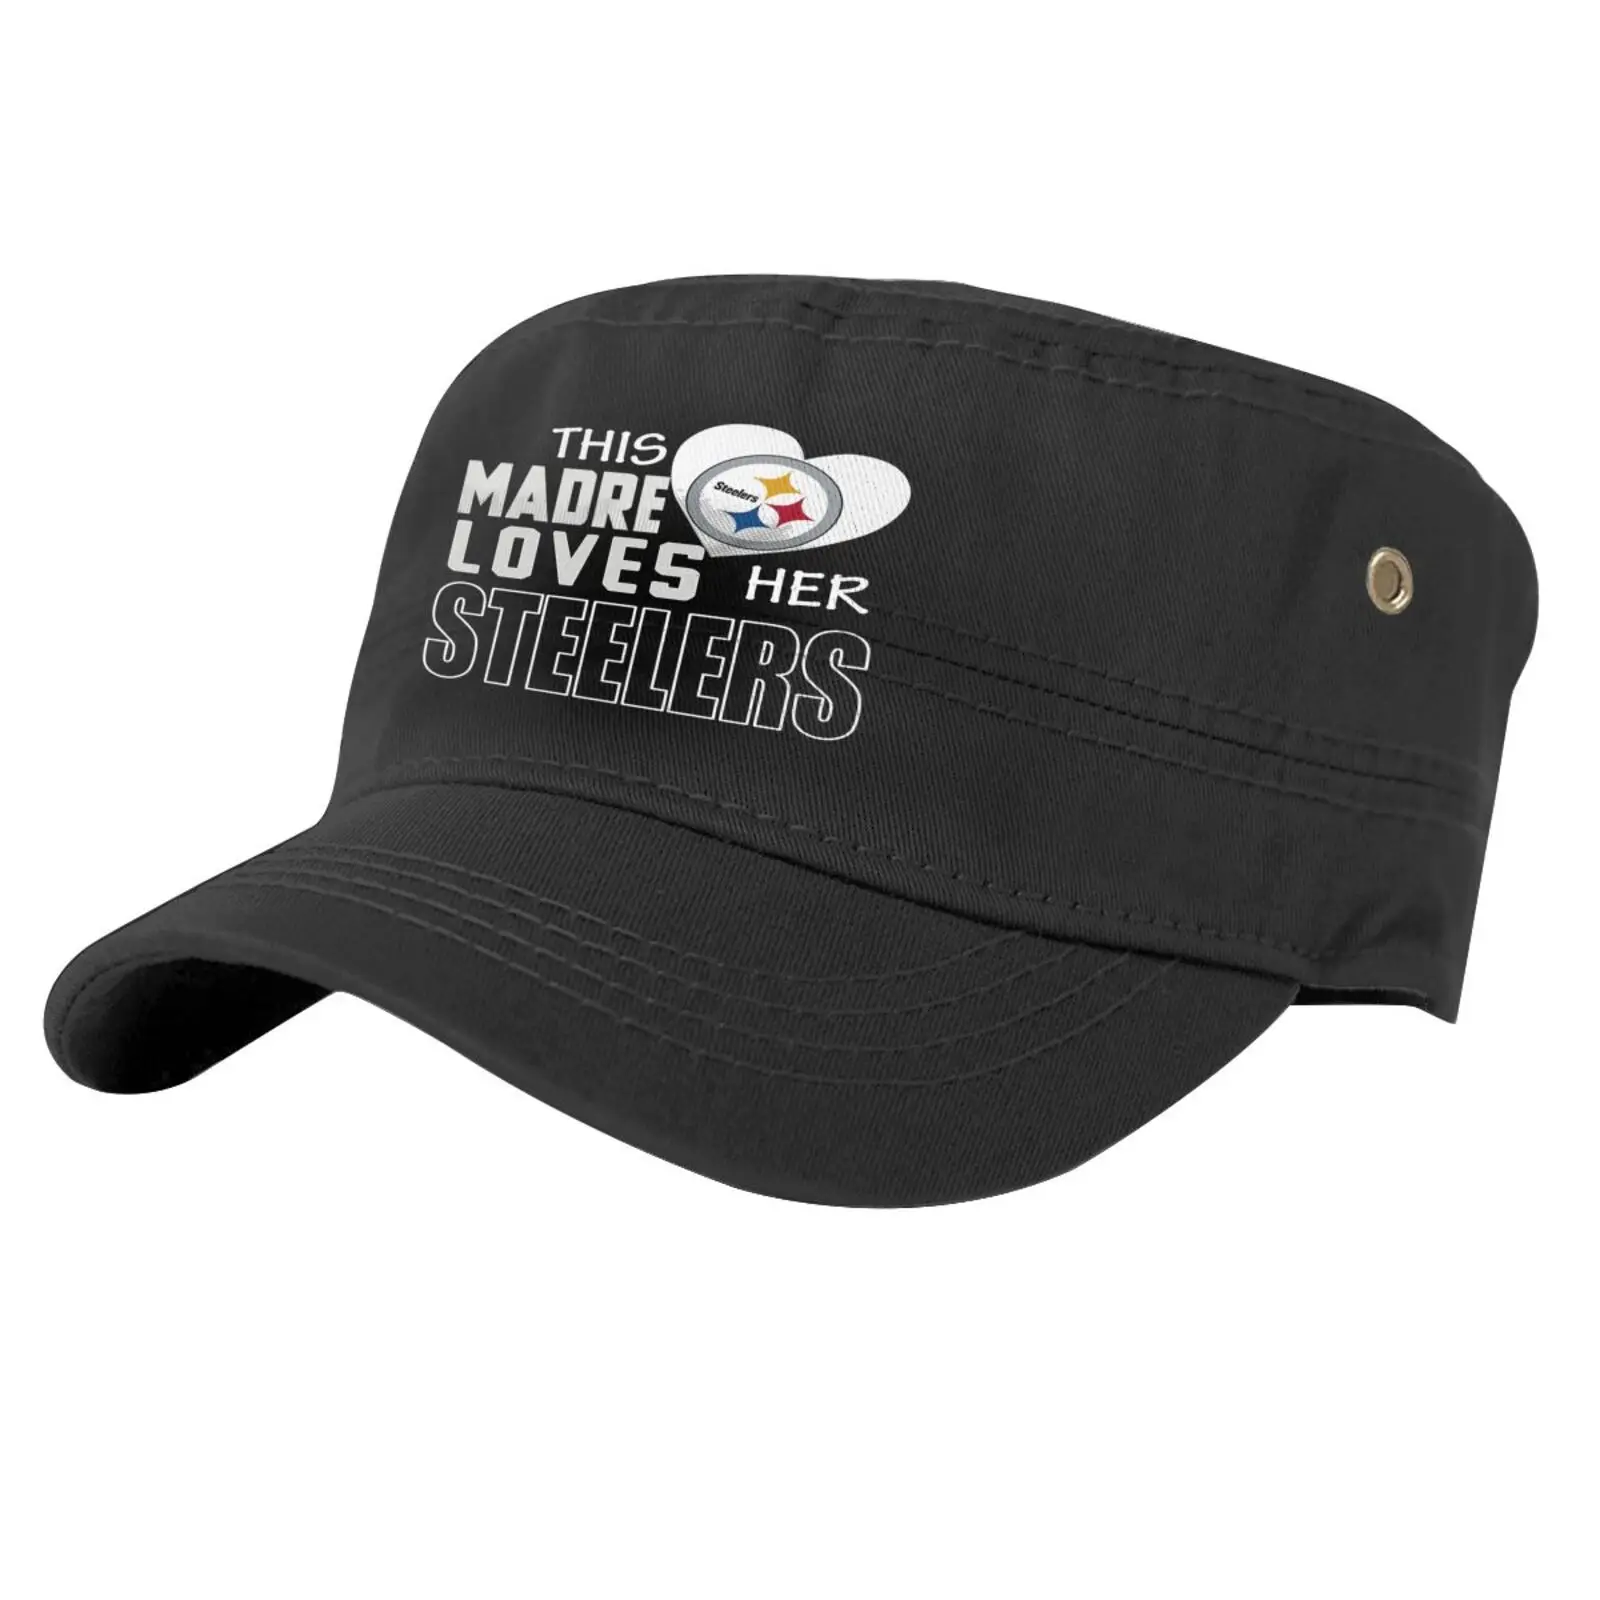 

This Madre Loves Her Steelers Caps For Men Cap Male Man Hat Beret Brazil Beanies For Women Cowgirl Women's Bucket Hat Mens Cap